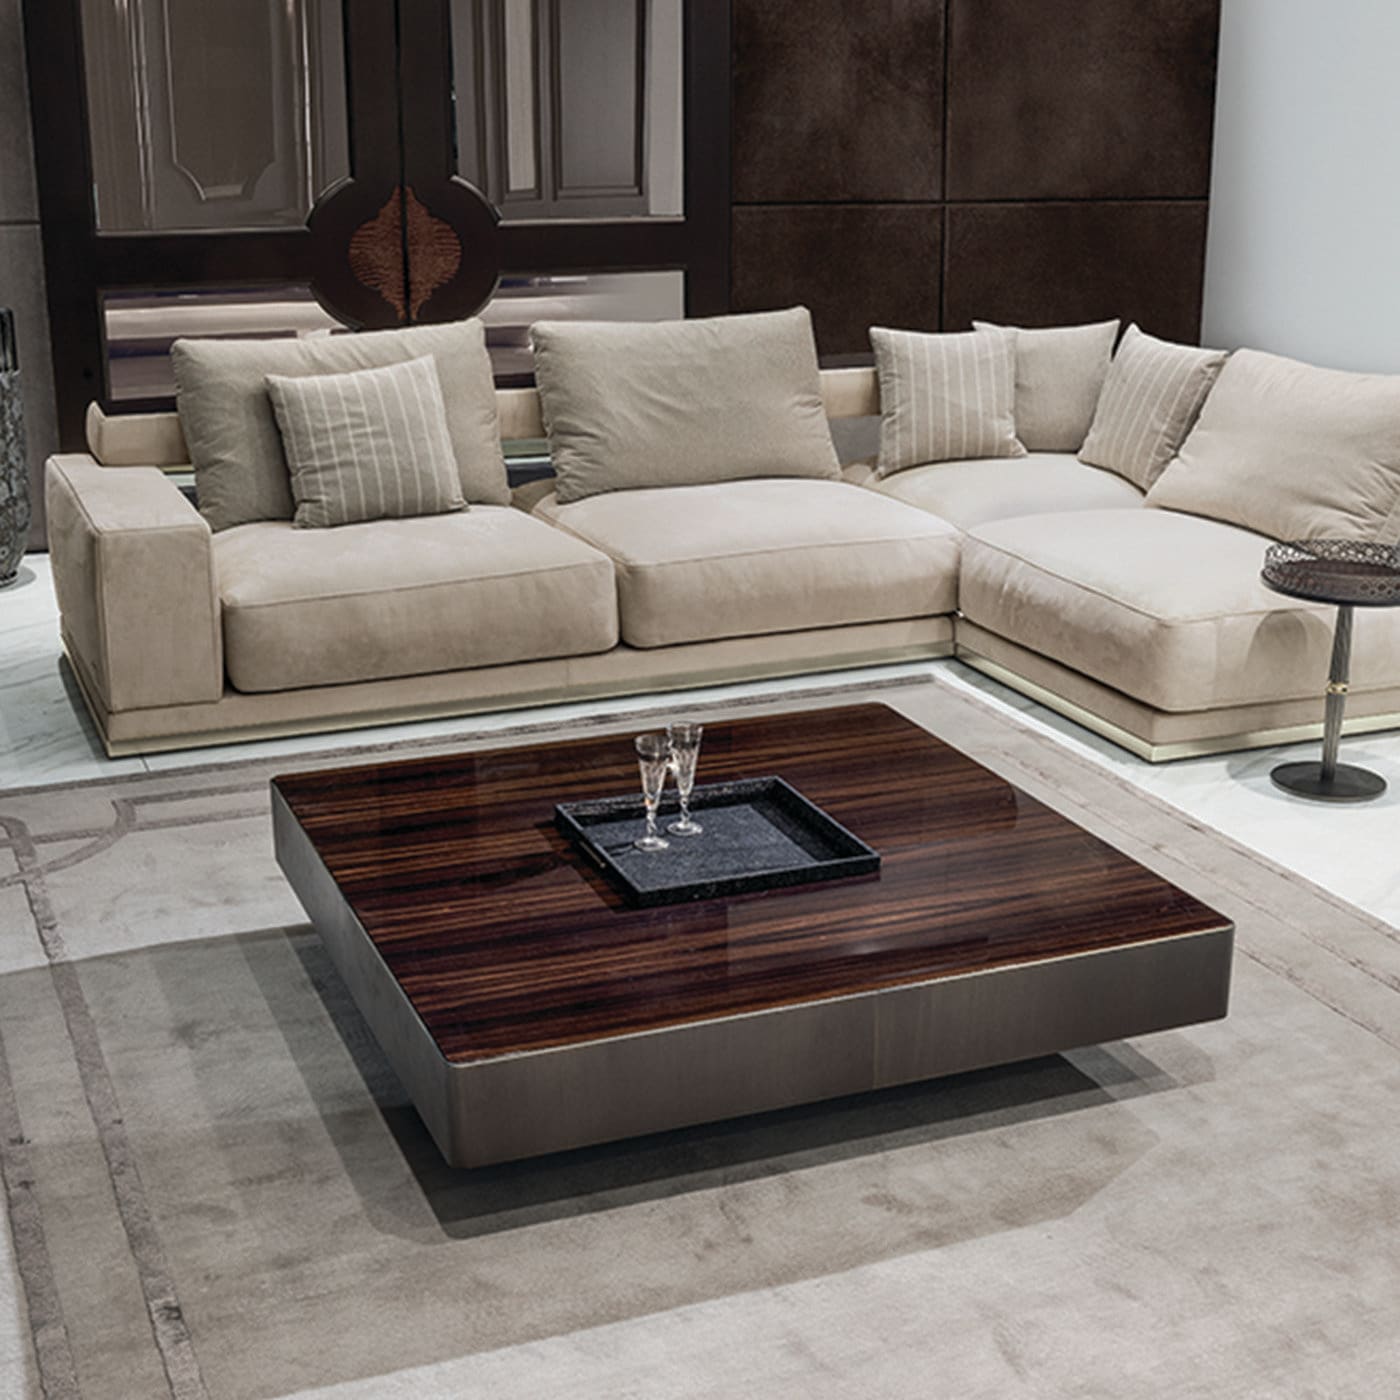 Lonely Coffee Table by Giuseppe Viganò - Longhi